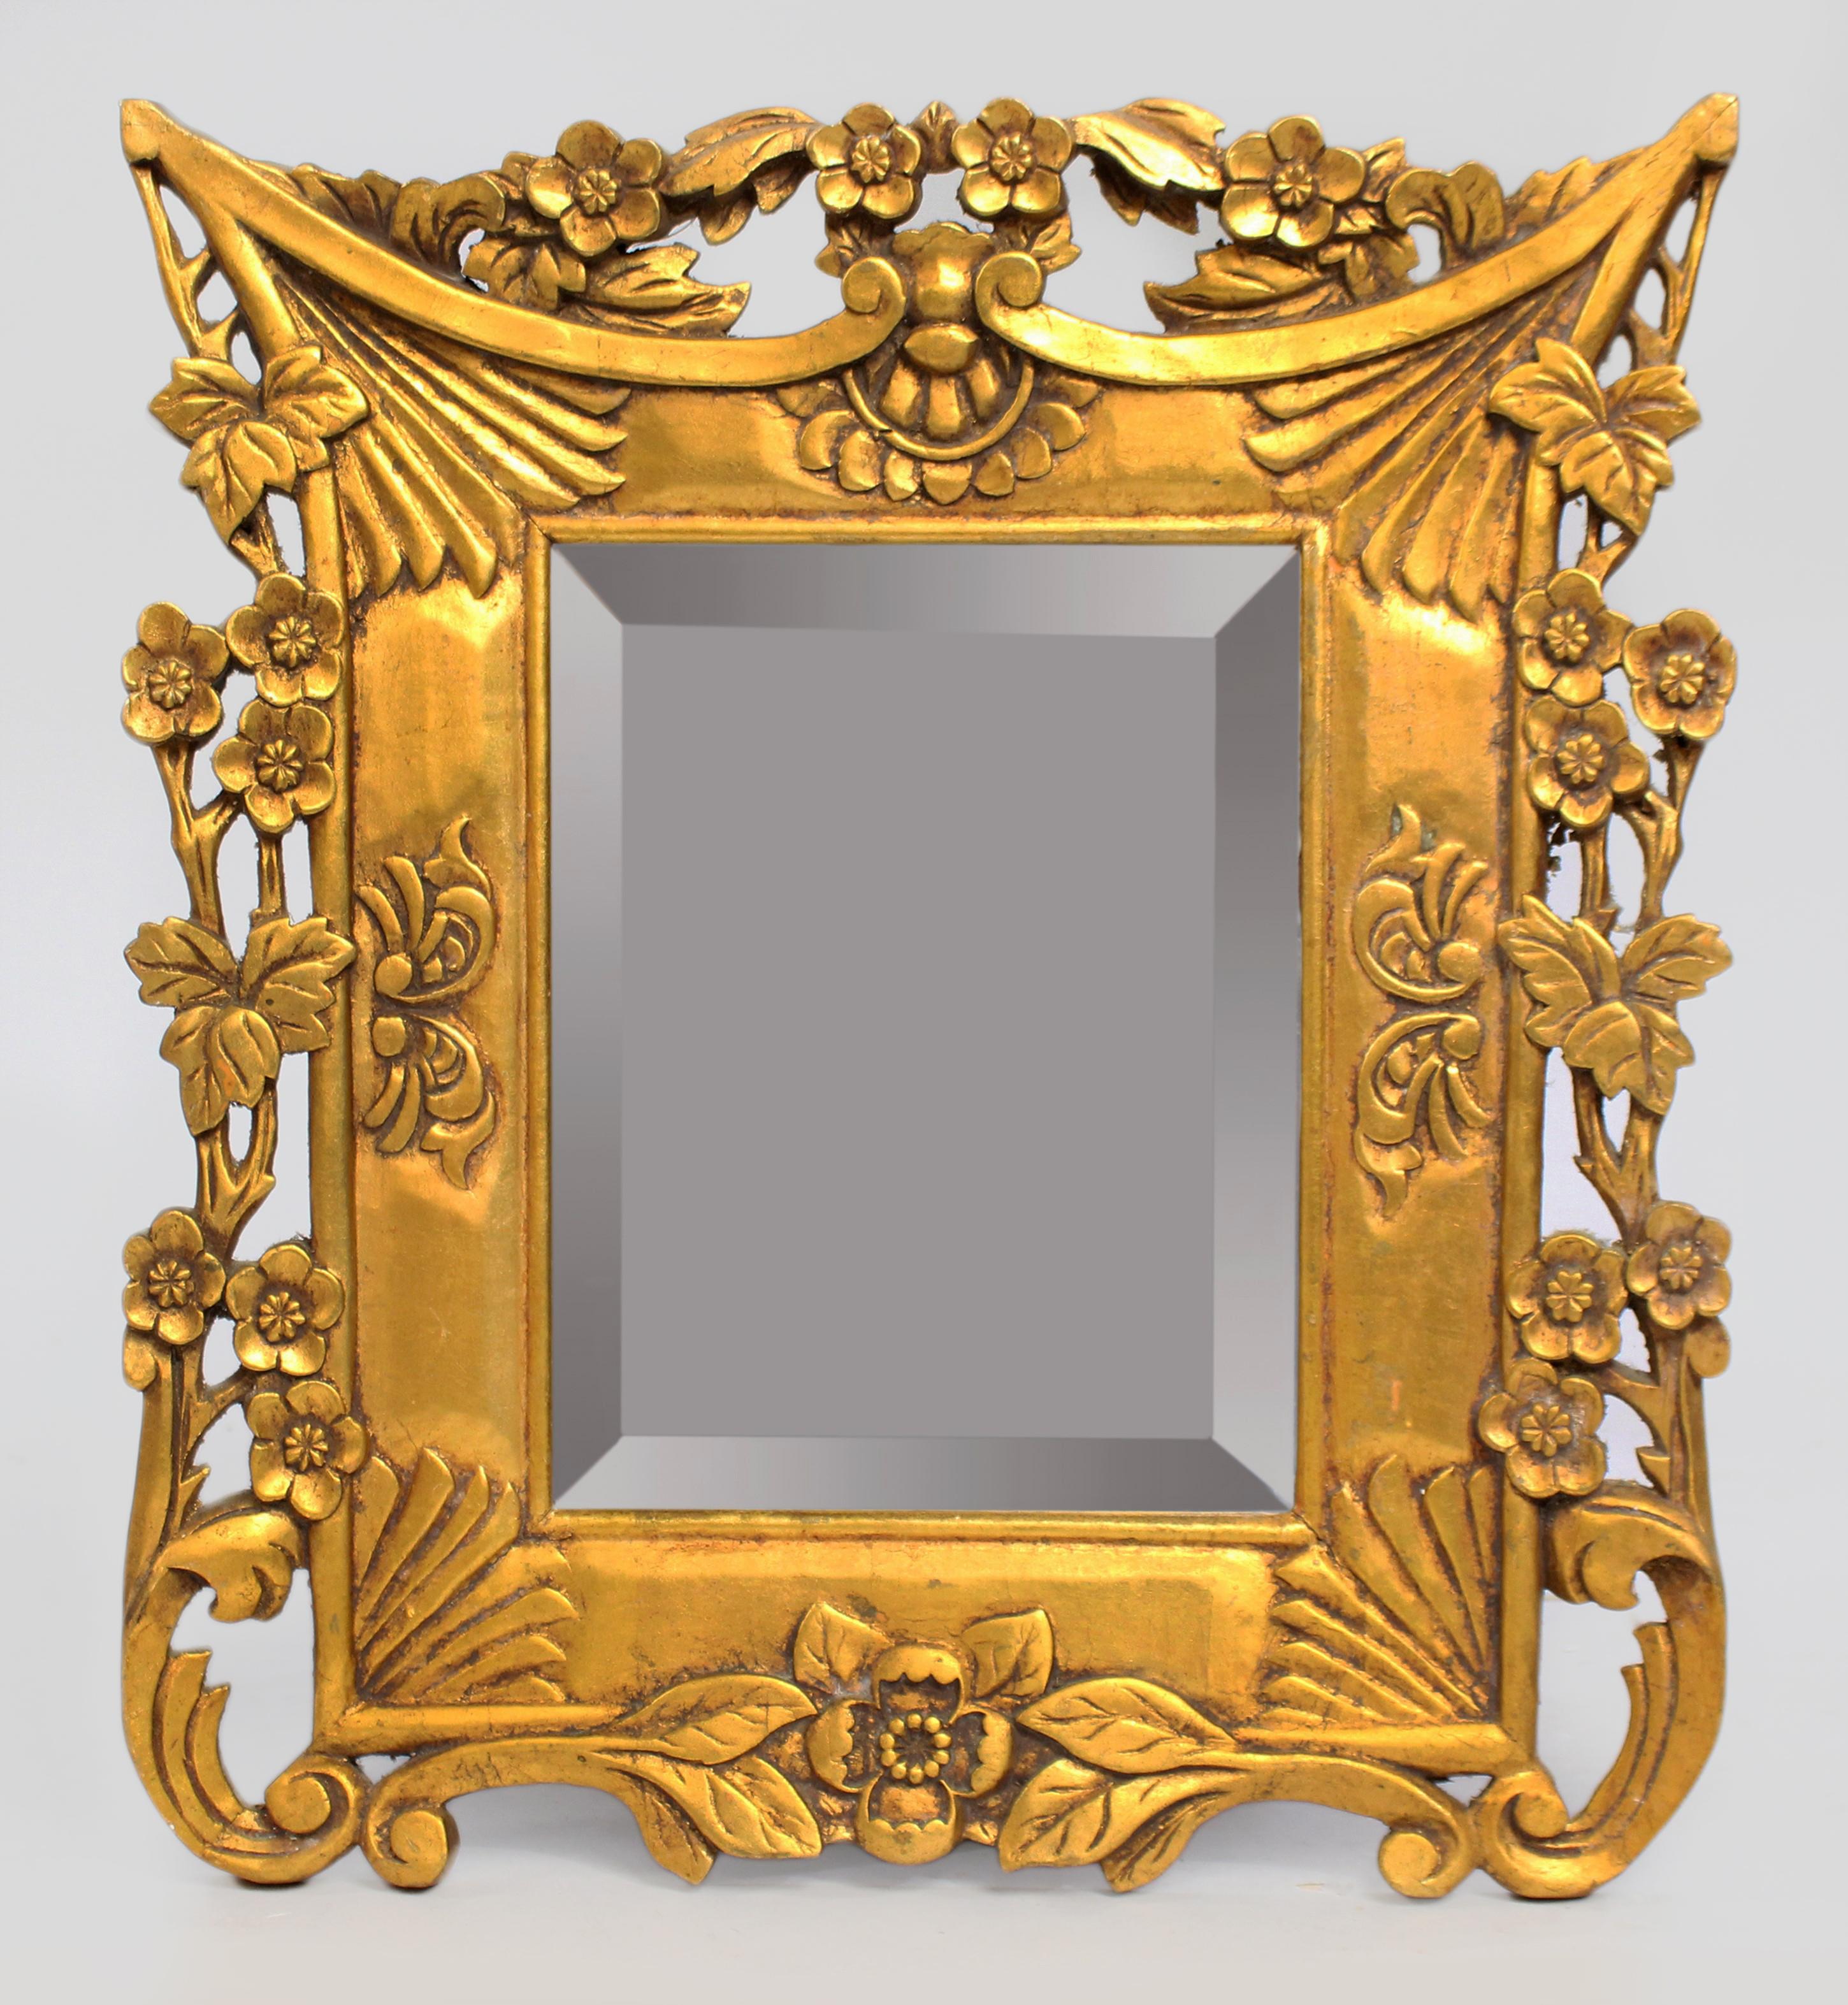 Set of 4 carved floral giltwood bevelled glass wall mirror


Width 41 cm 16 in

Height 45 cm 17 3/4 in
 

Period Late 20th c.

Frame Carved wood with gilt finish

Mirror Bevelled glass

Condition offered in good condition commensurate